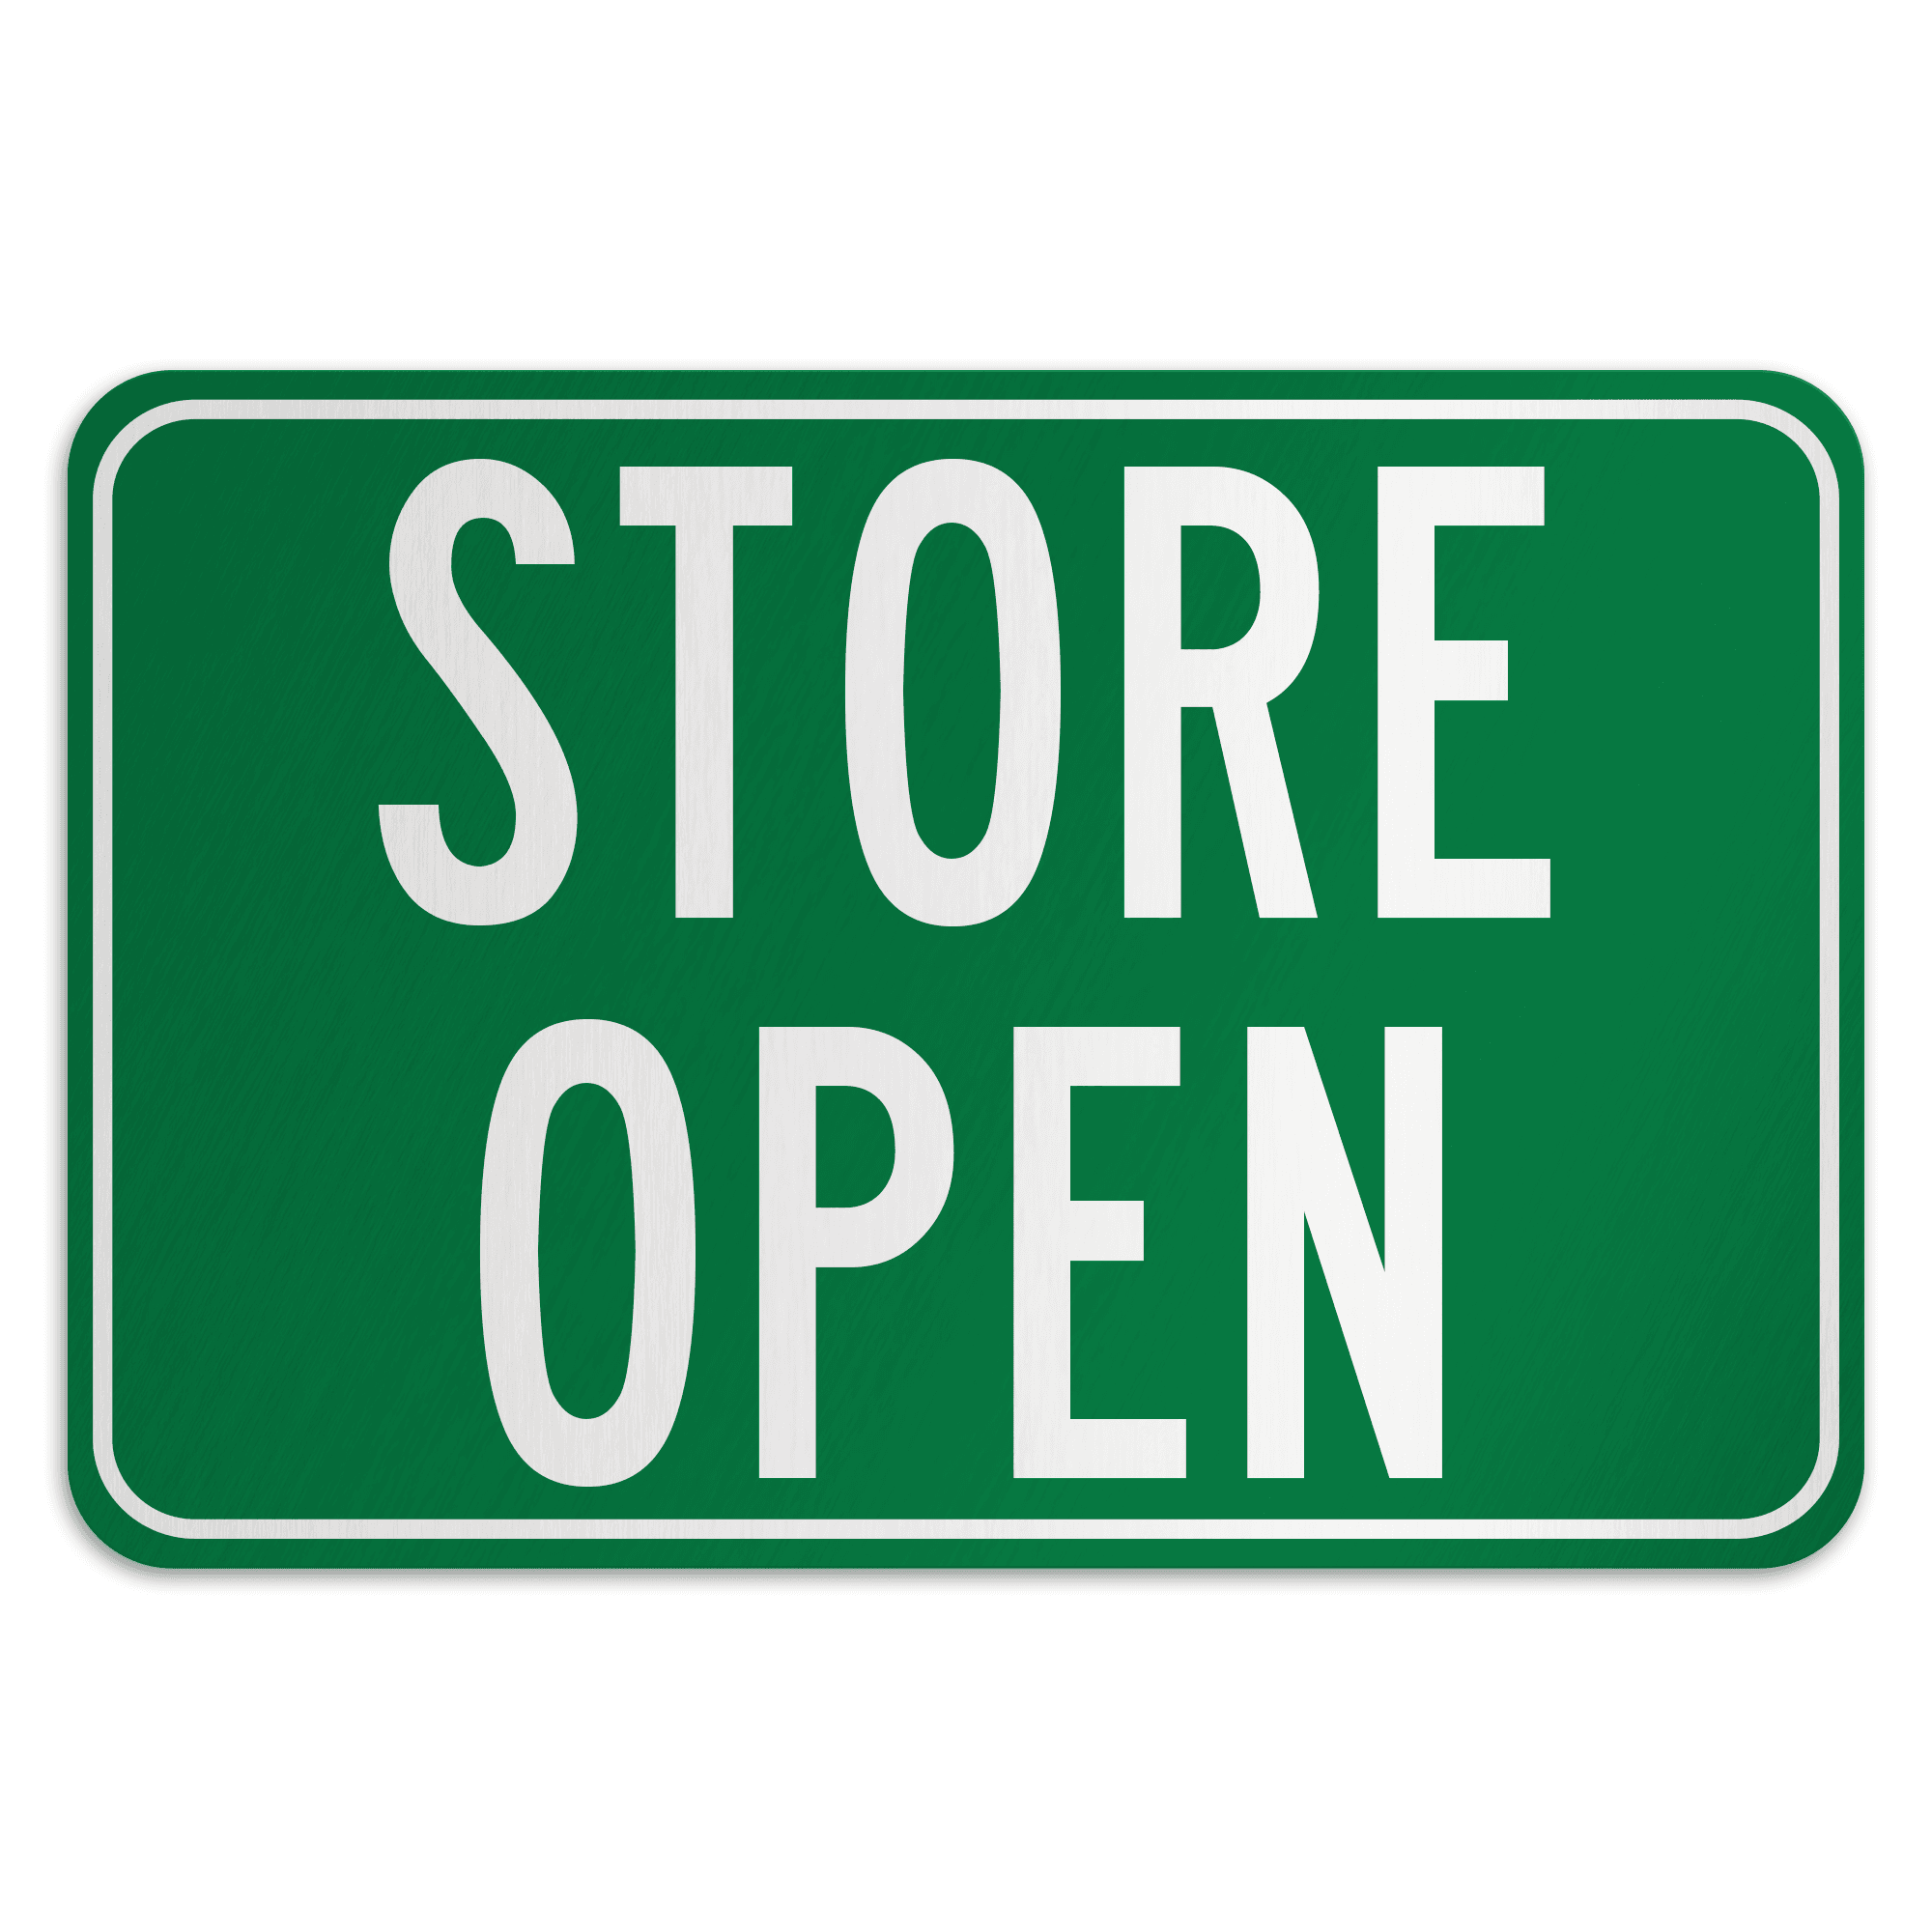 STORE OPEN American Sign Company